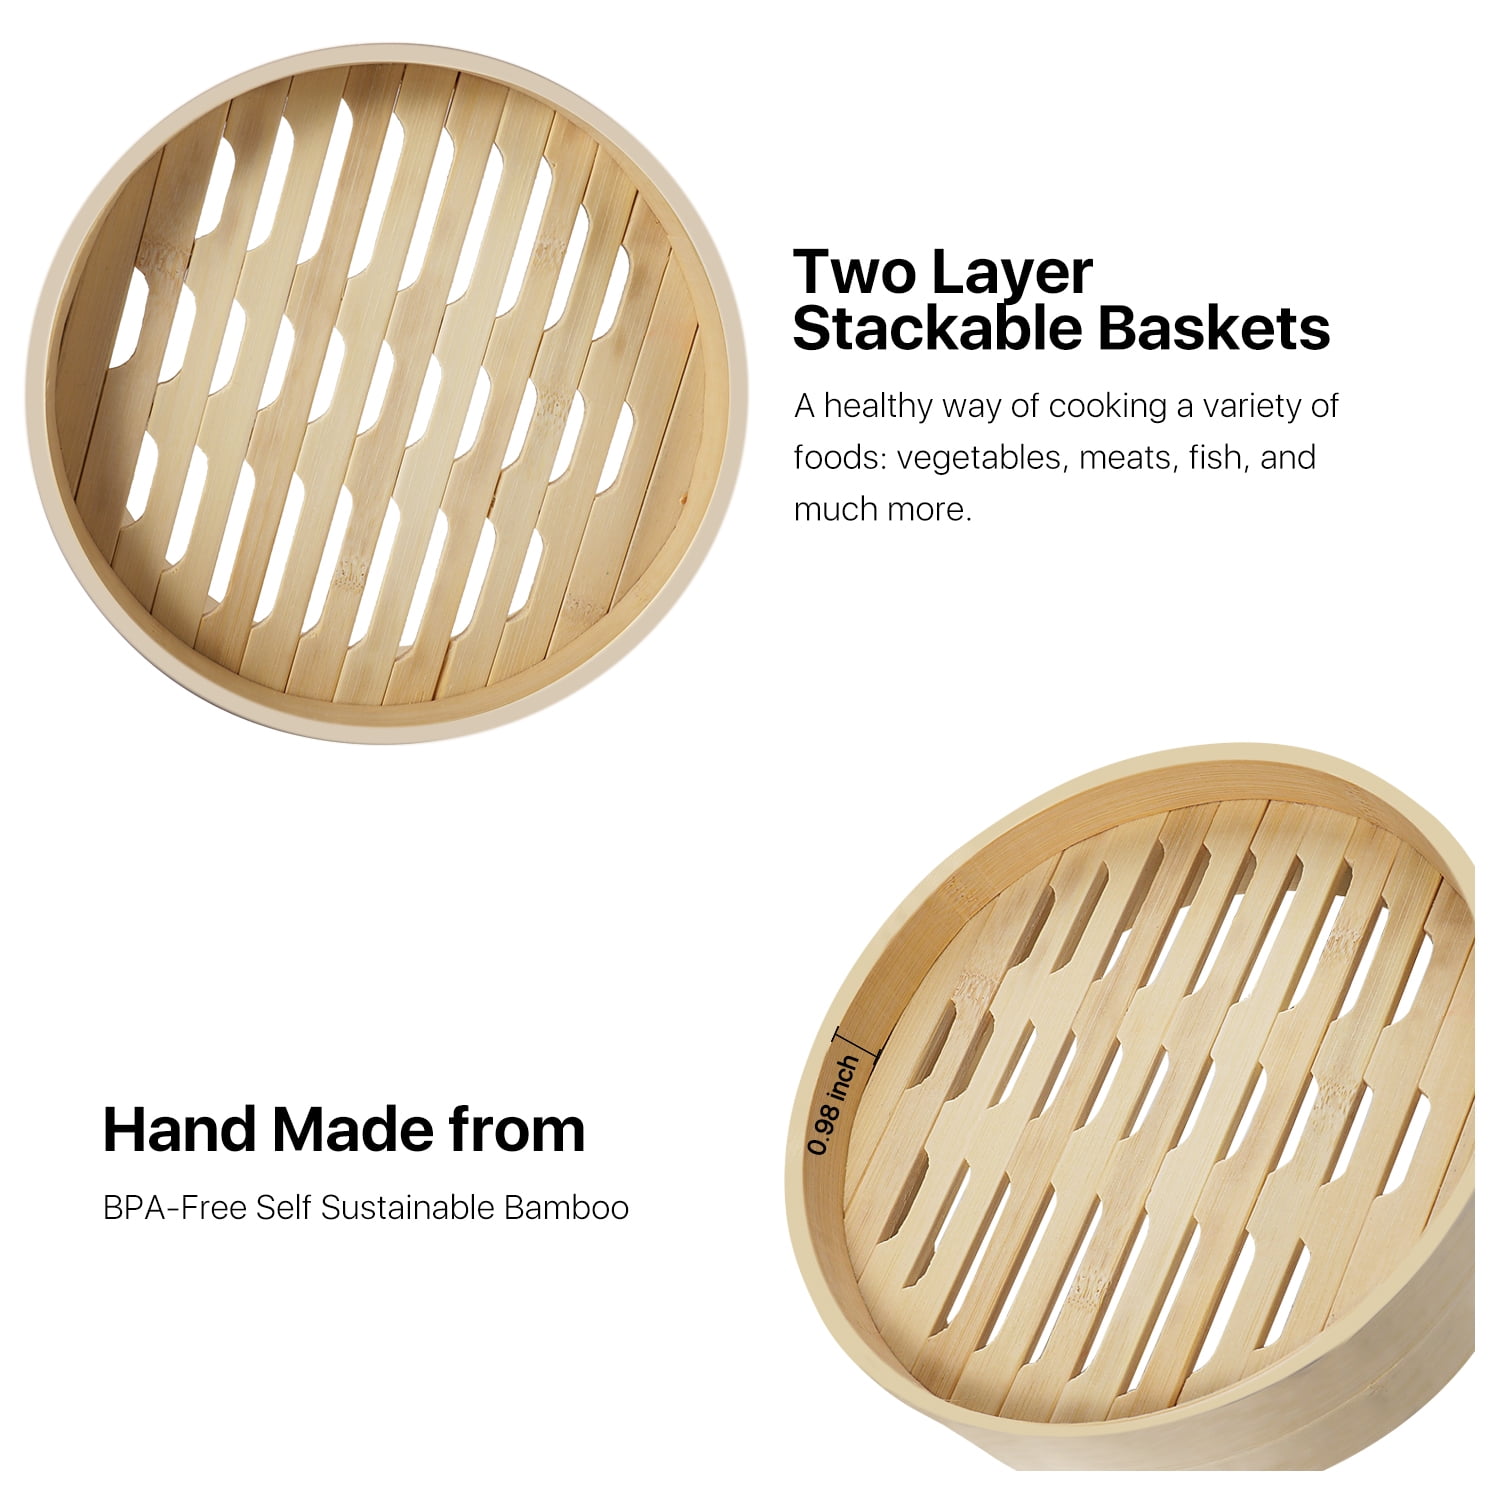 LokiLux Silicone Steamer Mat 10 Diameter Set of 6 Silicone Steamer Mesh Non-Stick Pad For Bamboo Steamer Basket Bamboo Steamer Liners 10 Inch 